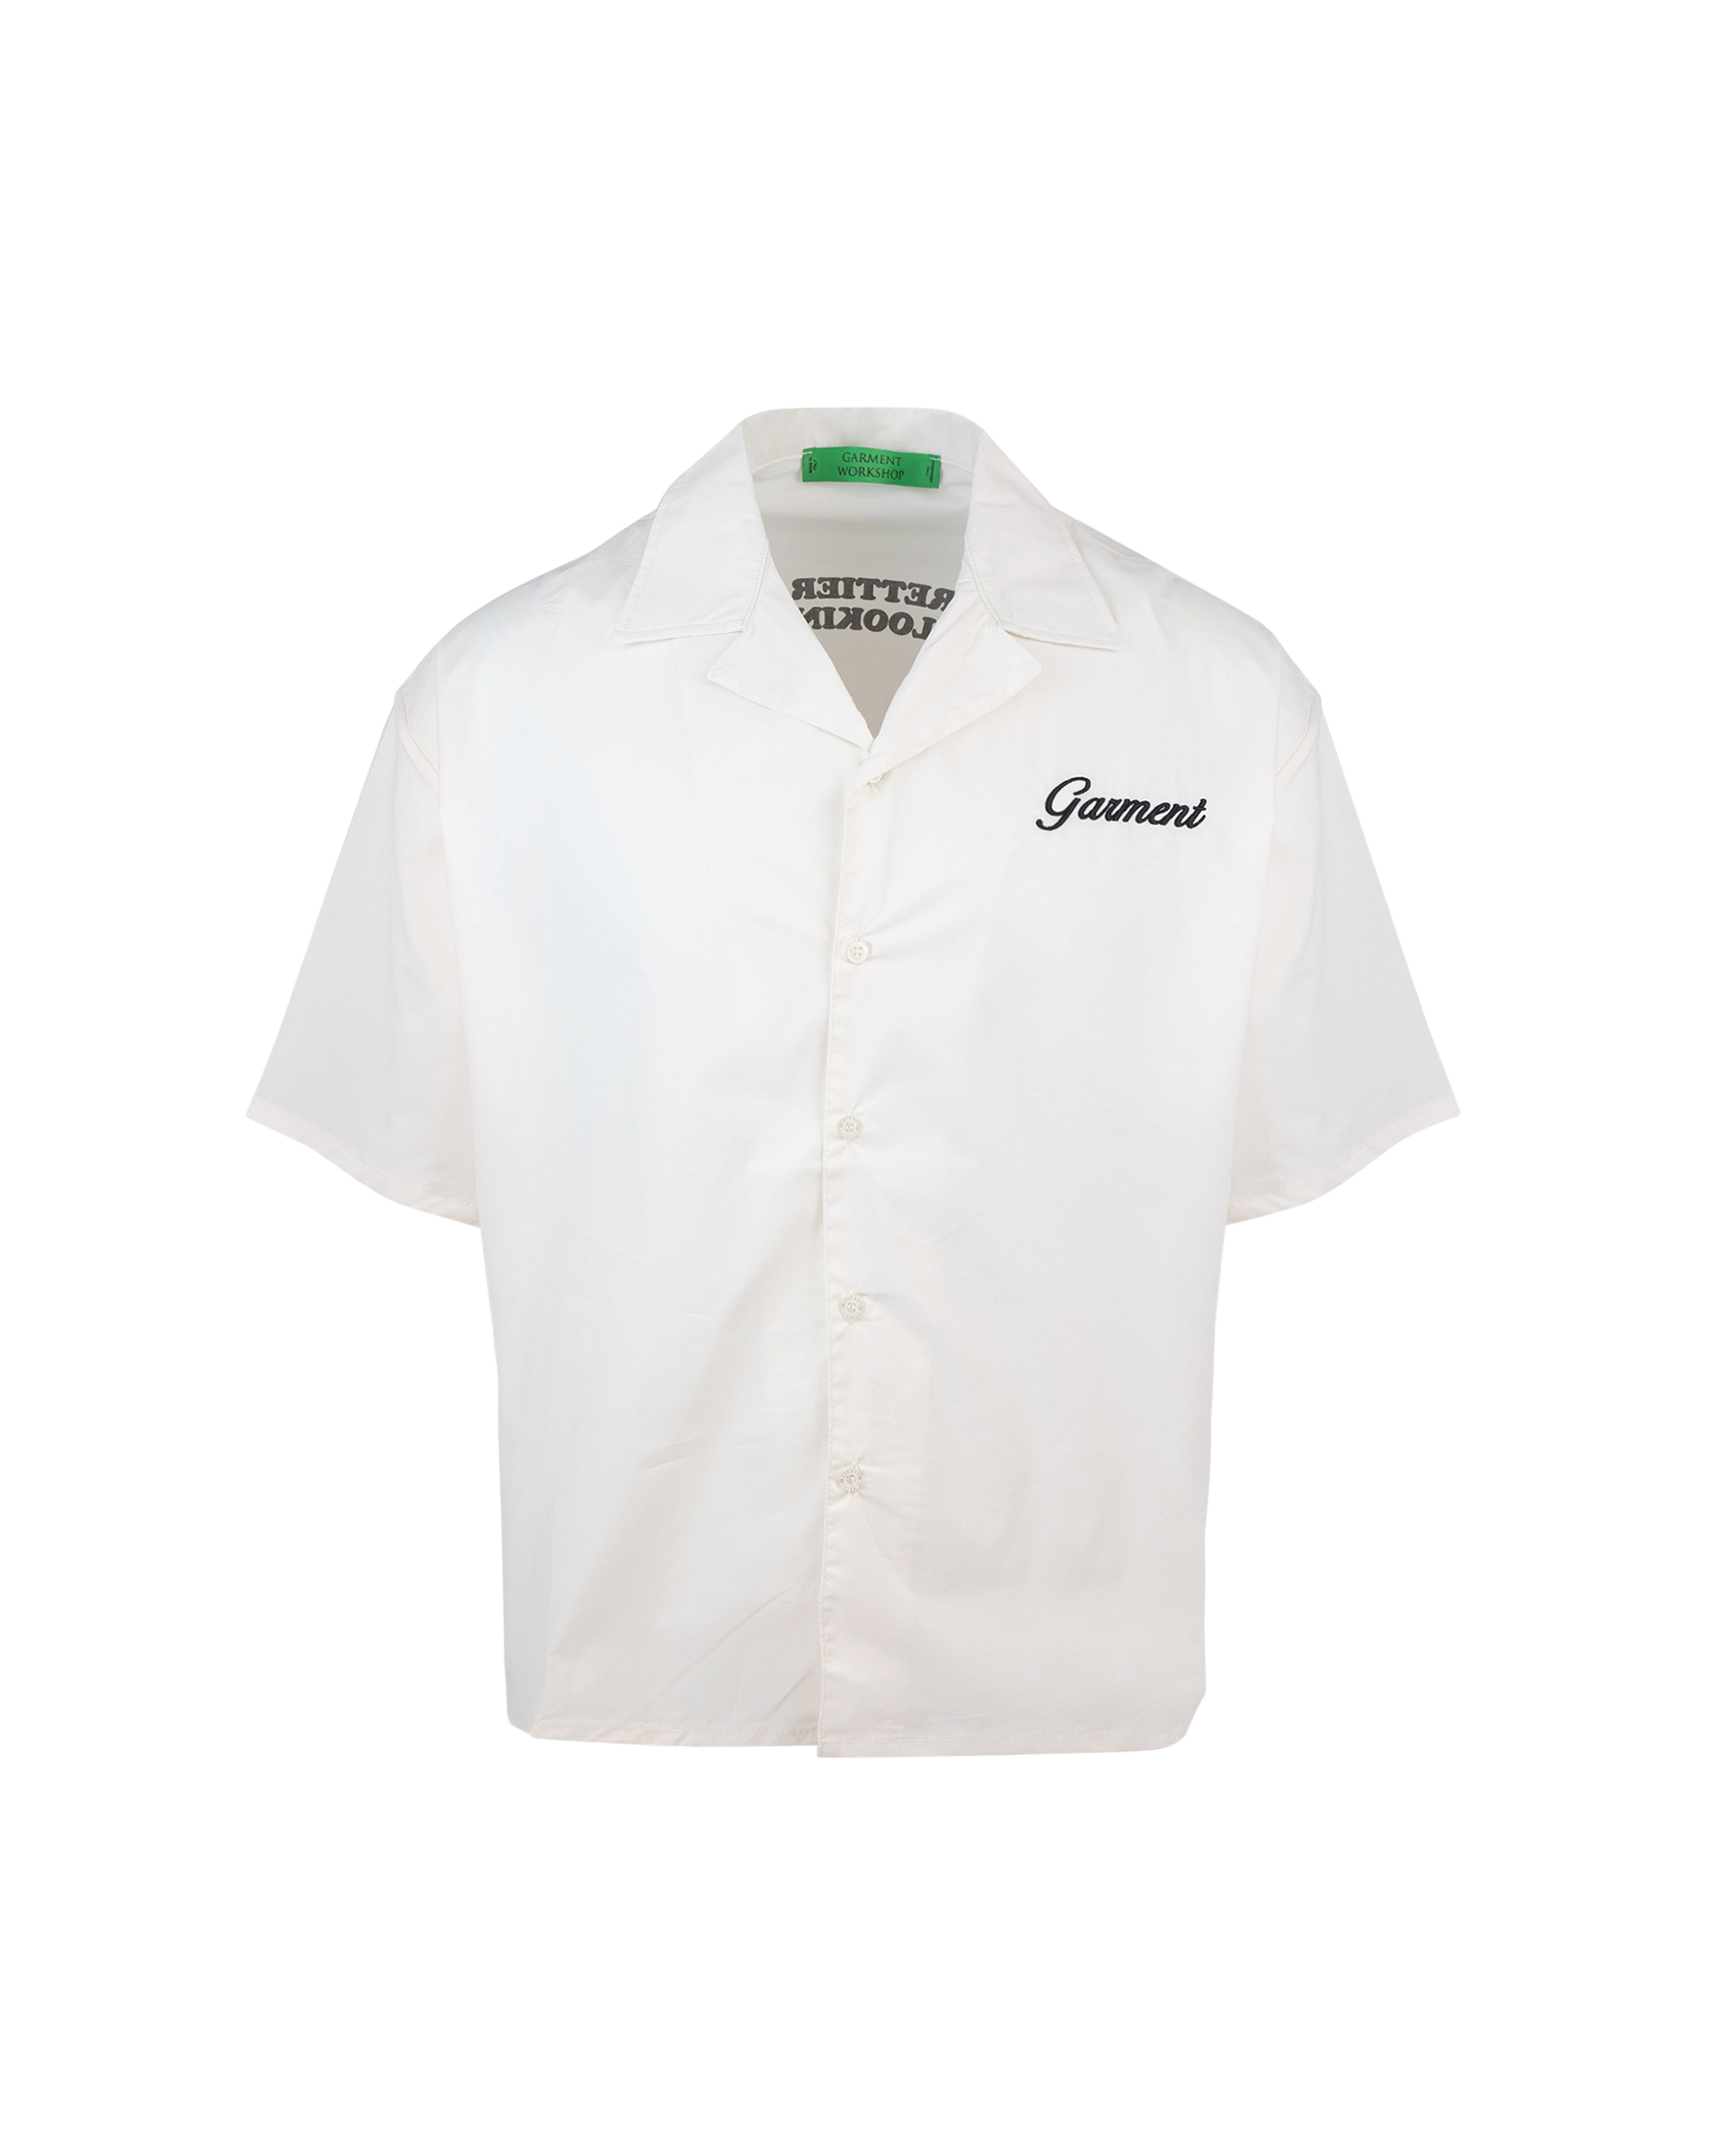 Shop Garment Workshop Bowling Shirt With Print And Embroidery In Gw018heavy Cream